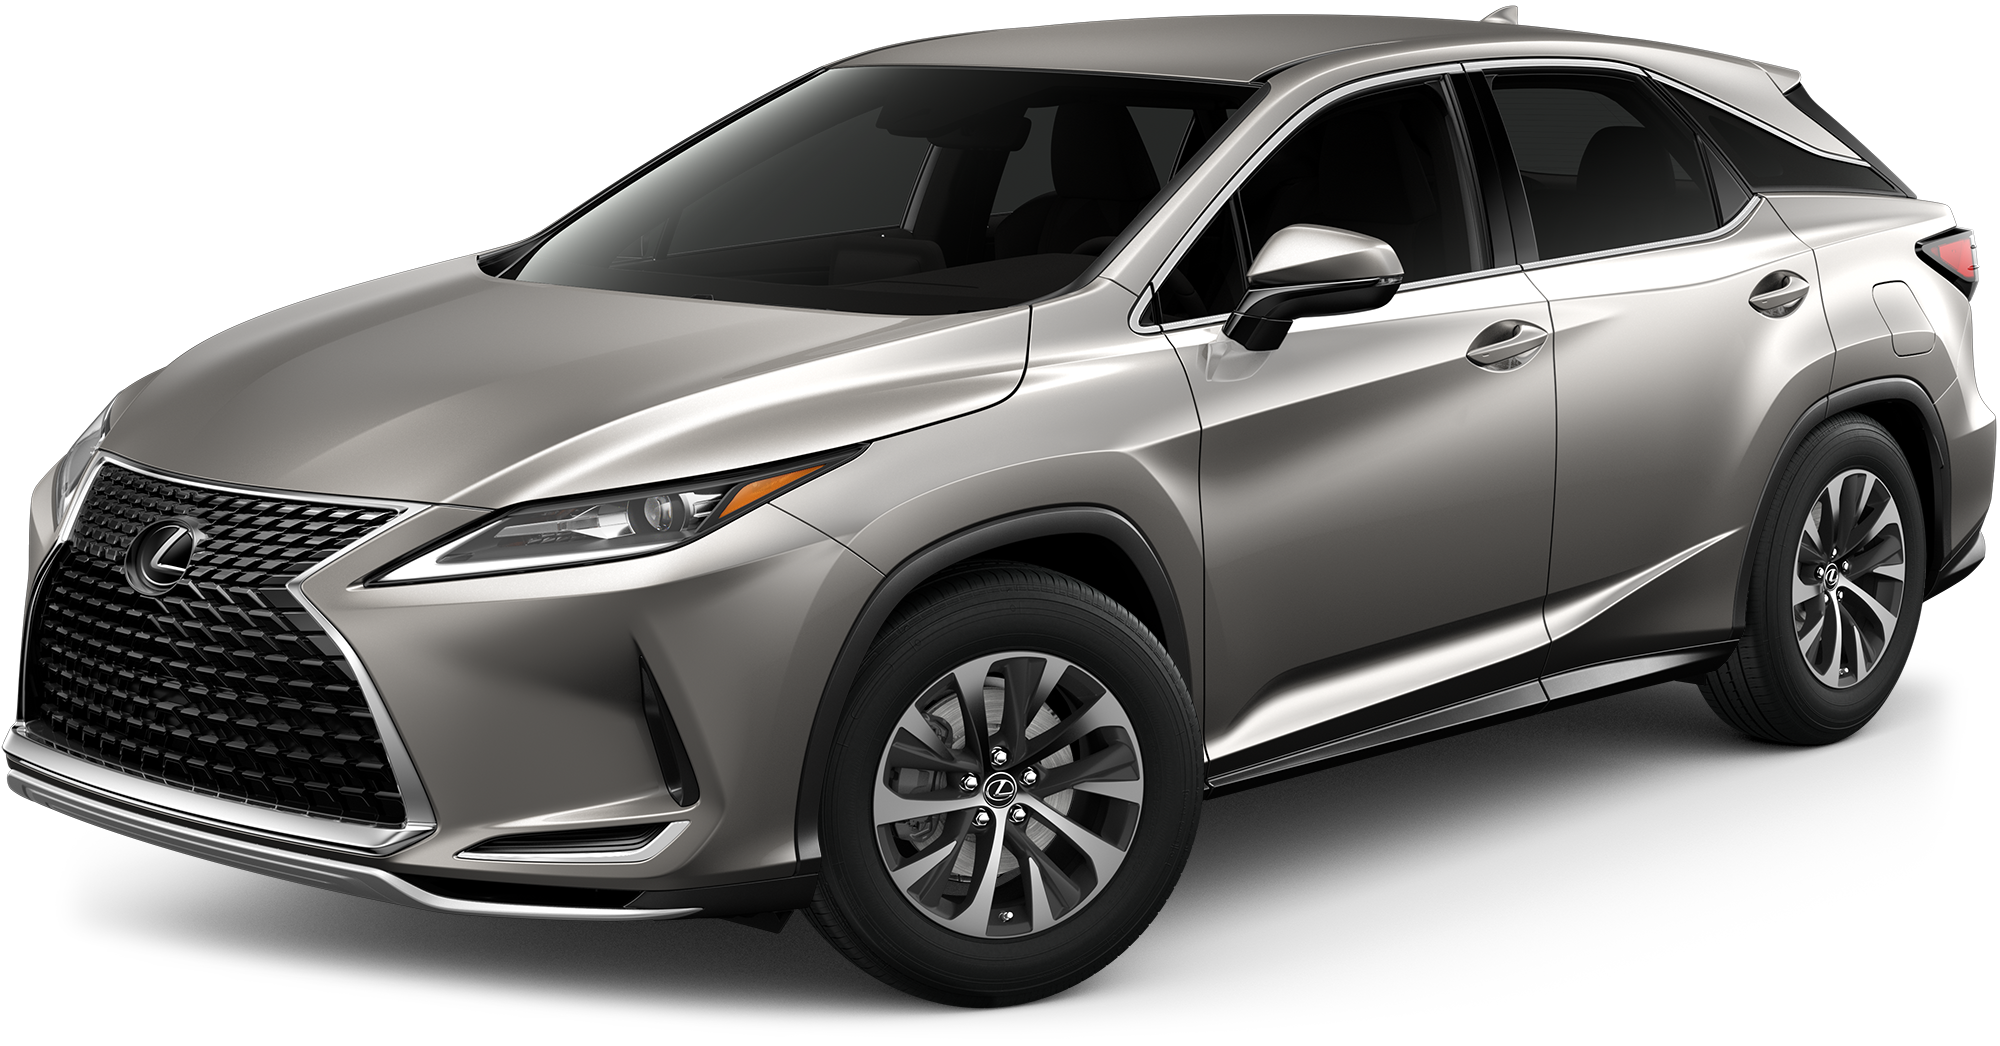 2020-lexus-rx-350-incentives-specials-offers-in-raleigh-nc-at